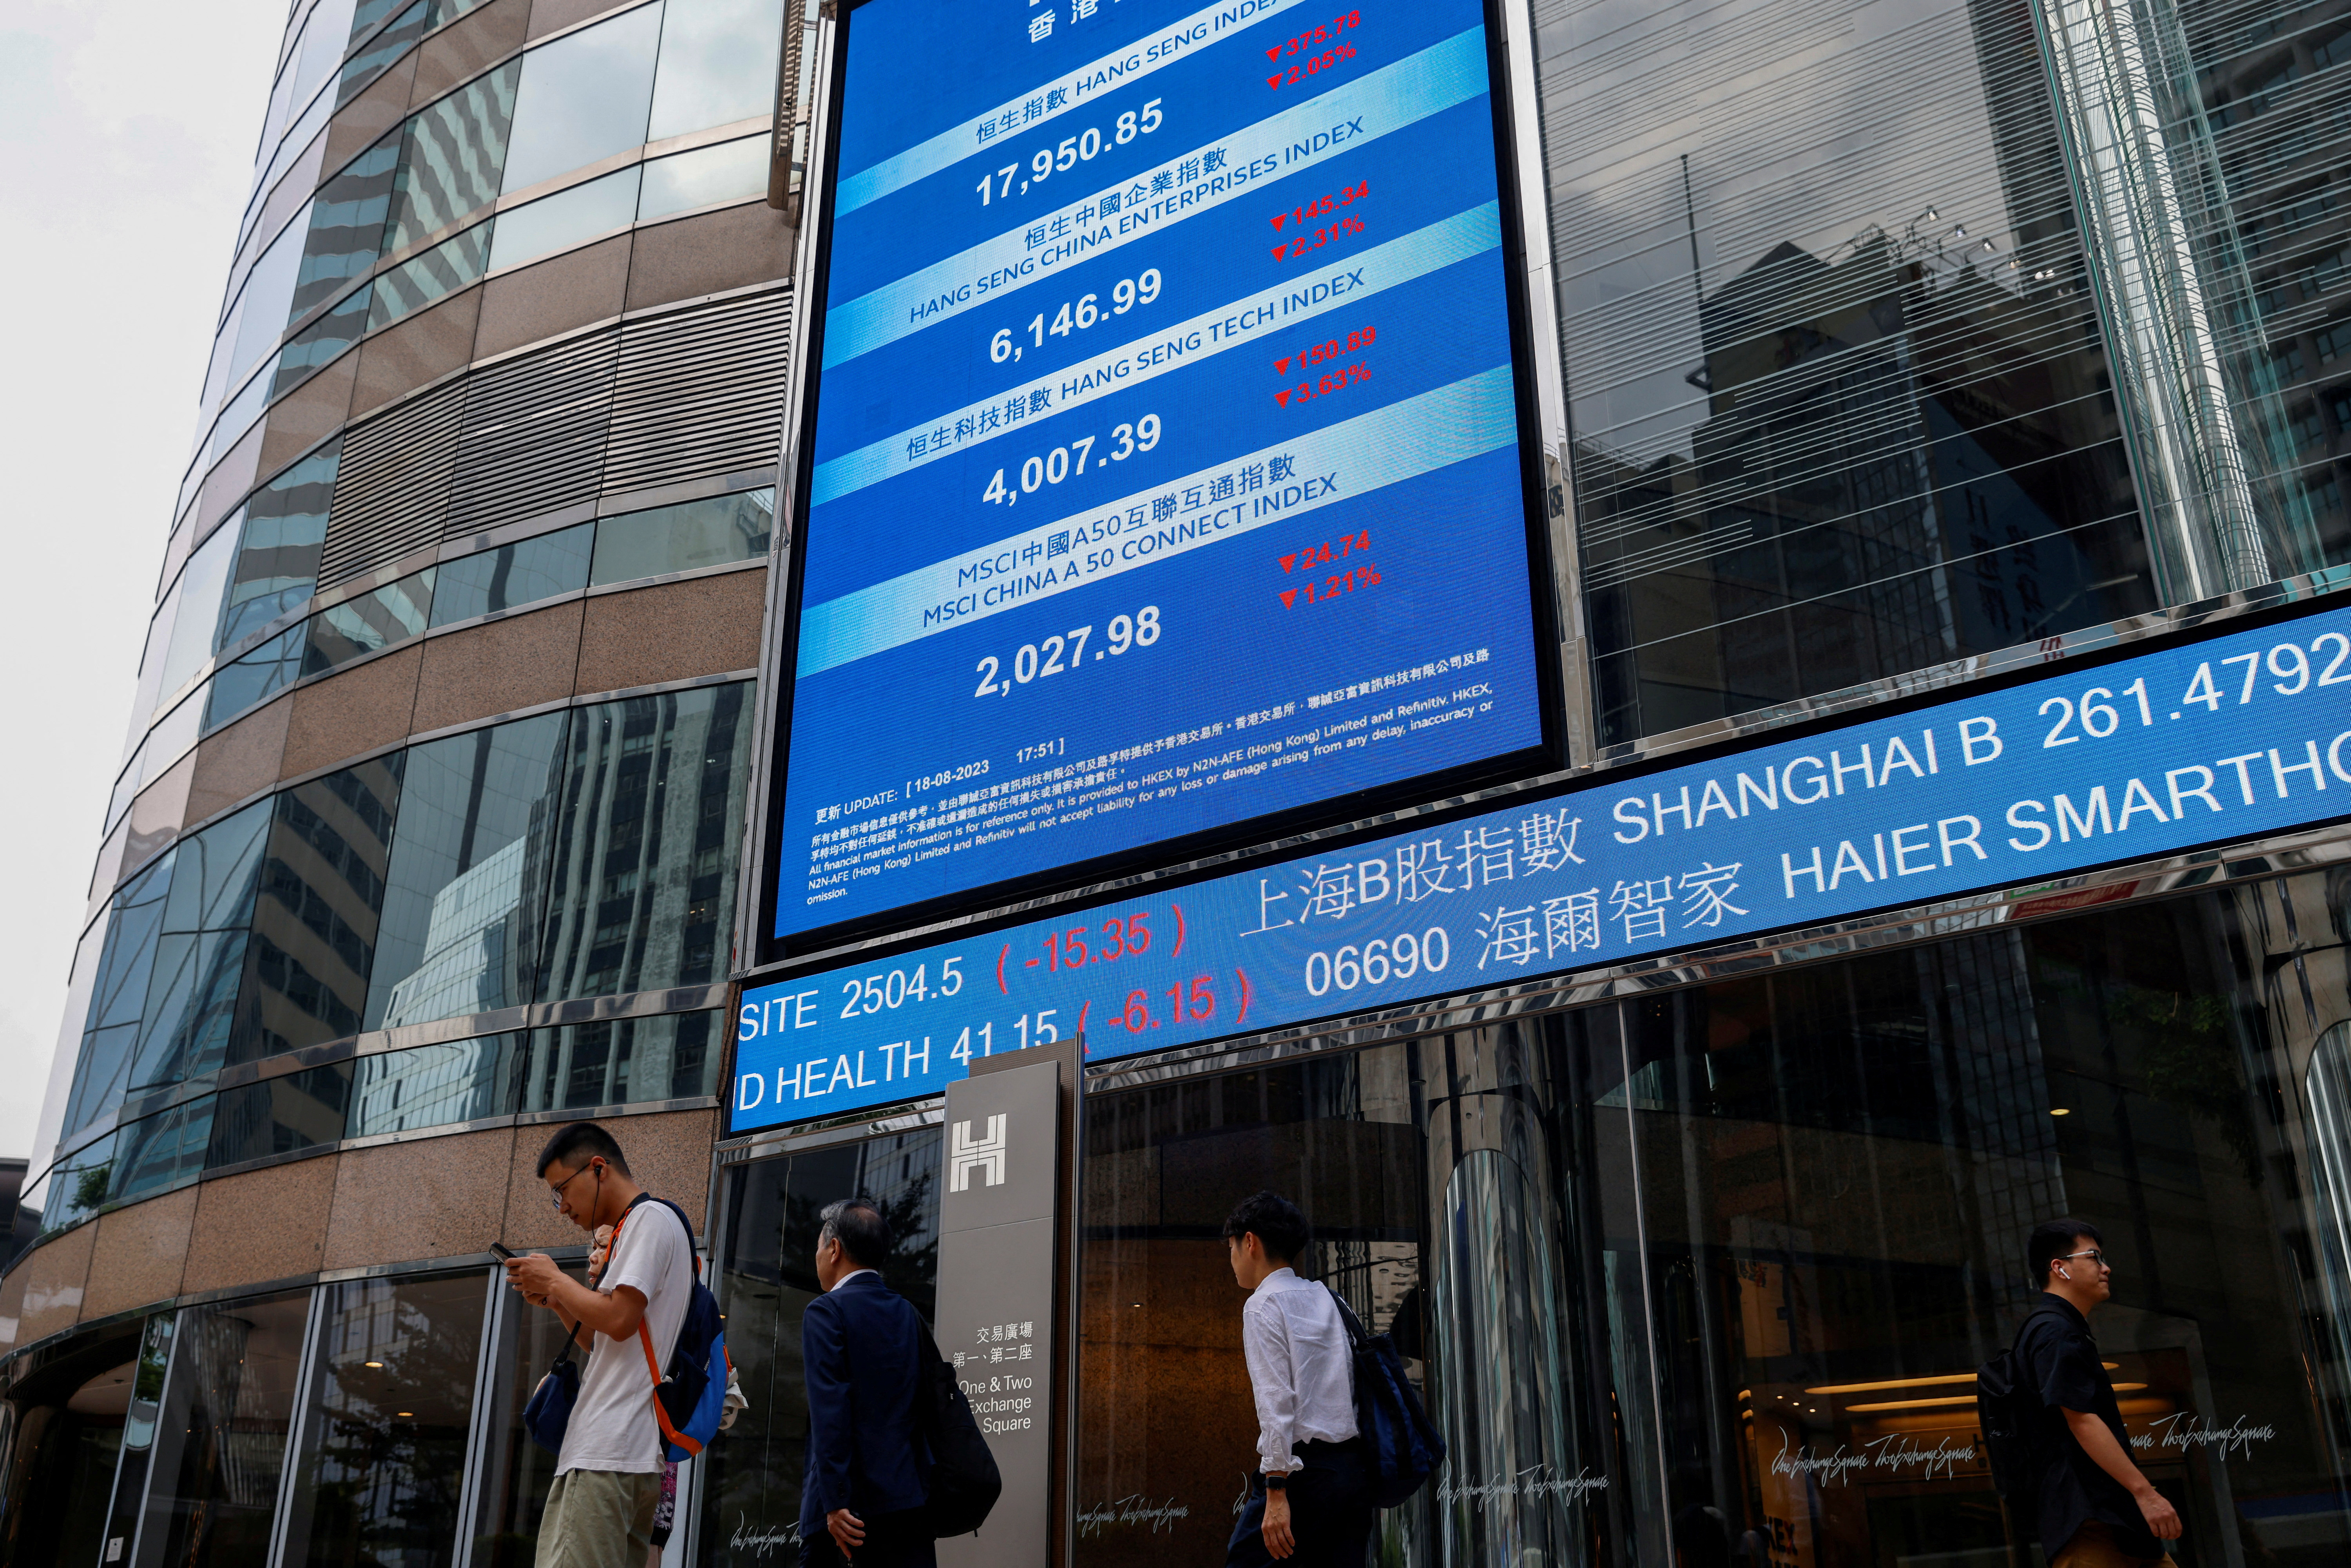 Screens showing the Hang Seng stock index and stock prices are seen outside Exchange Square, in Hong Kong